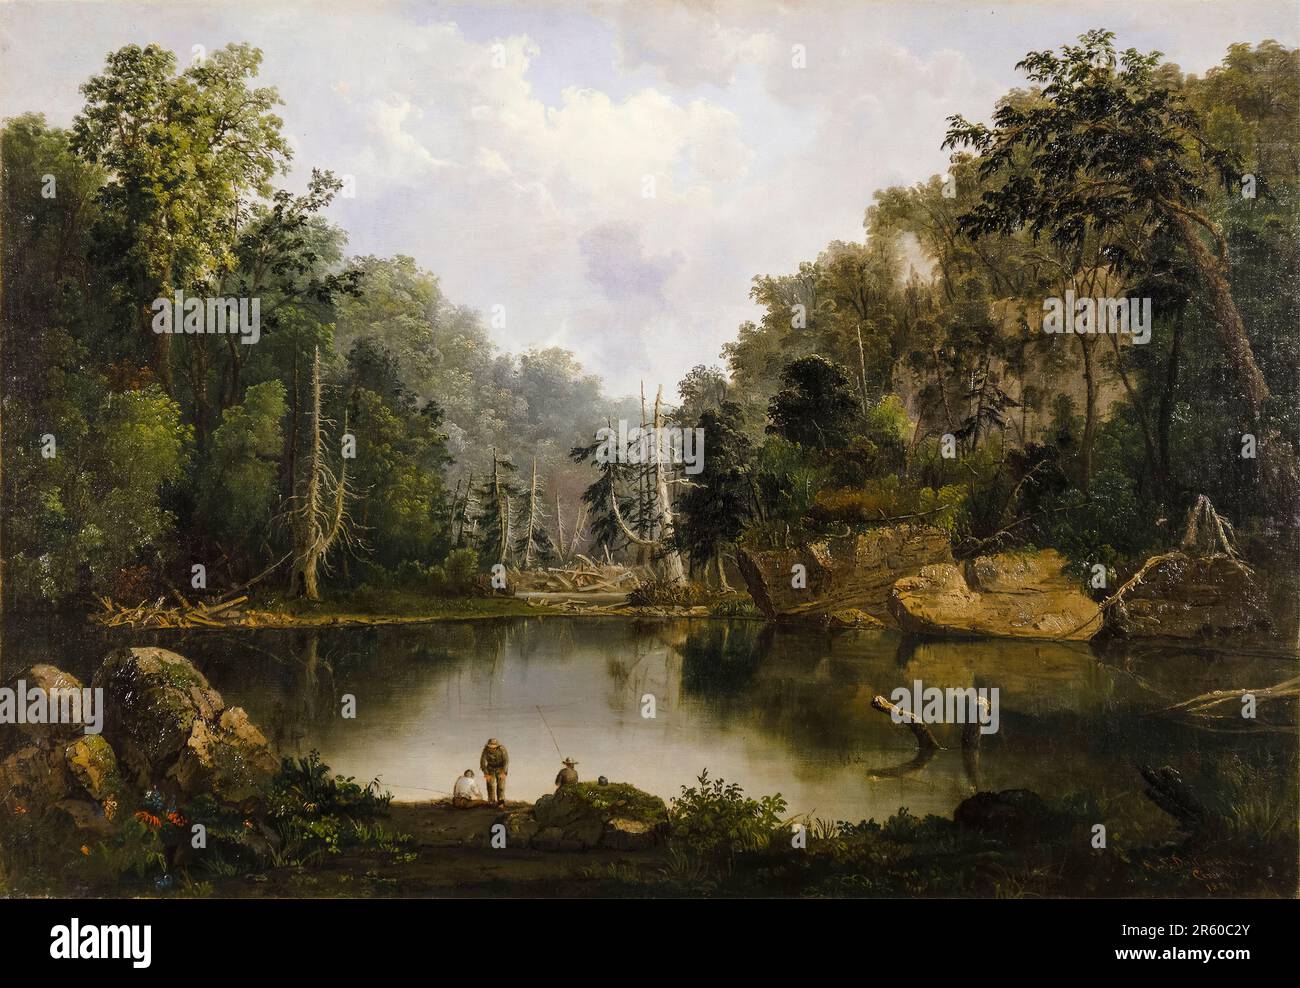 Robert S Duncanson, Blue Hole, Flood Waters, Little Miami River, landscape painting in oil on canvas, 1851 Stock Photo